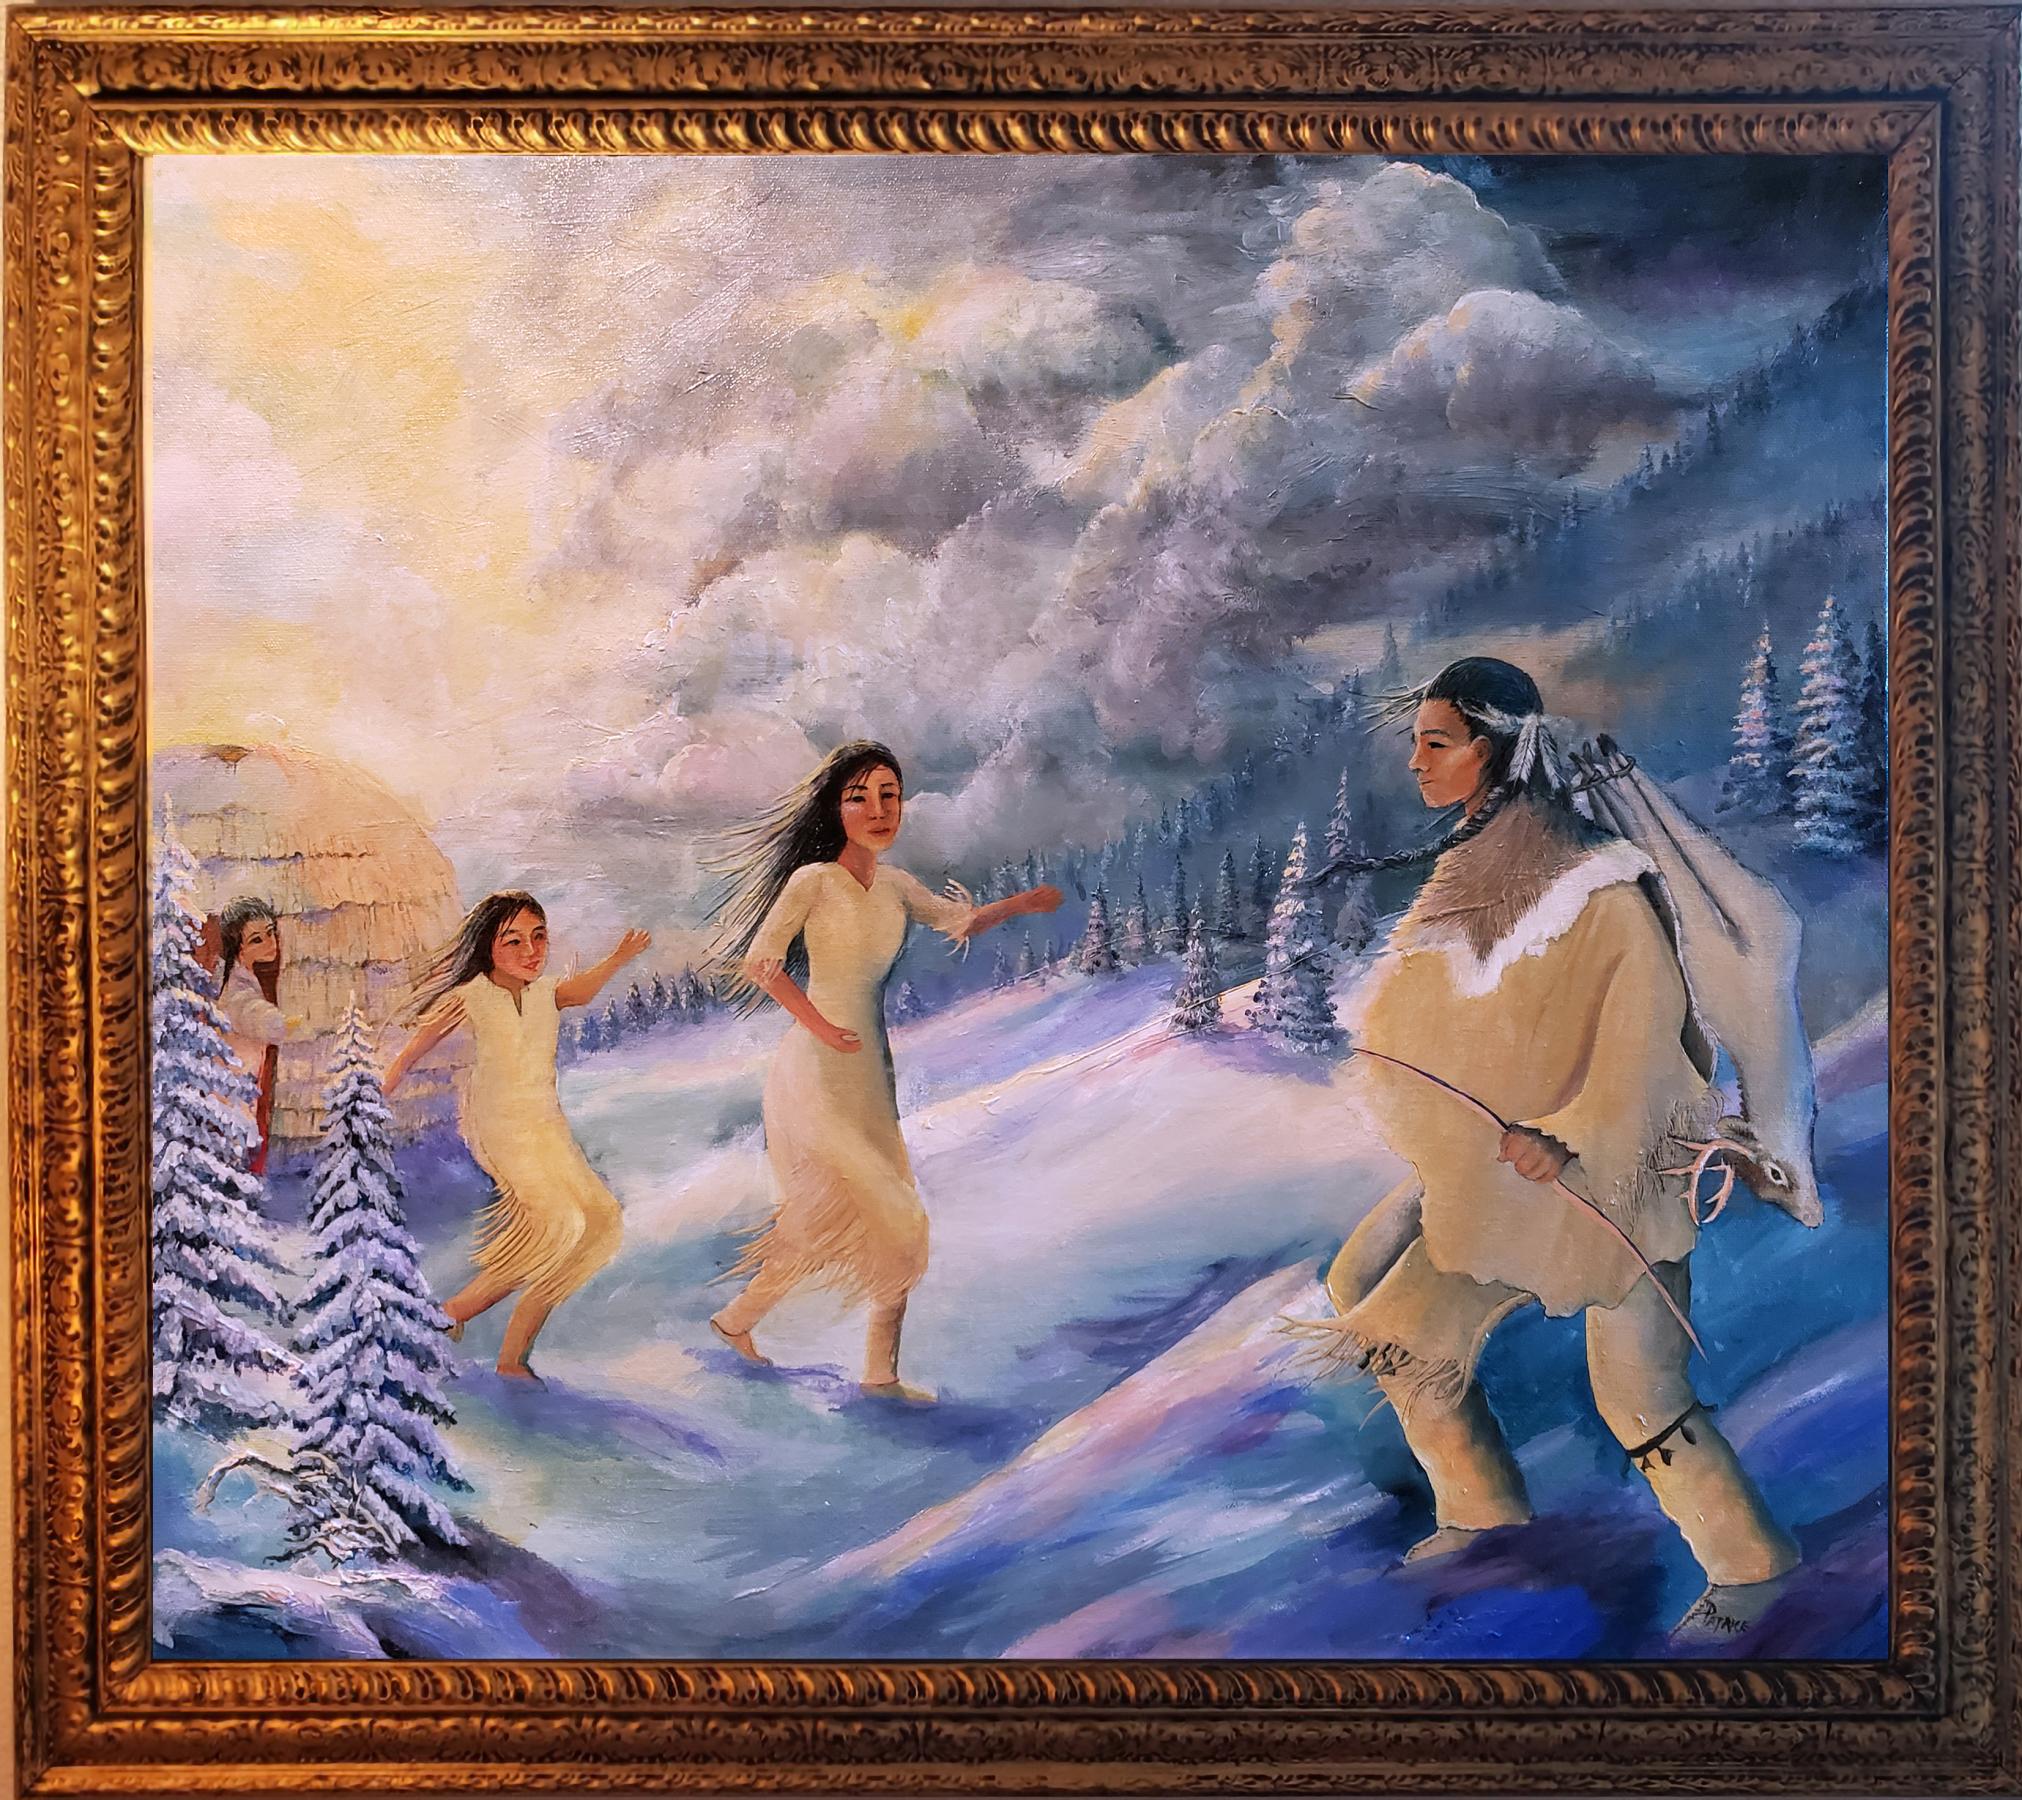 The Father has survived the Mountain Storm and his wife and children run to meet him at sunrise